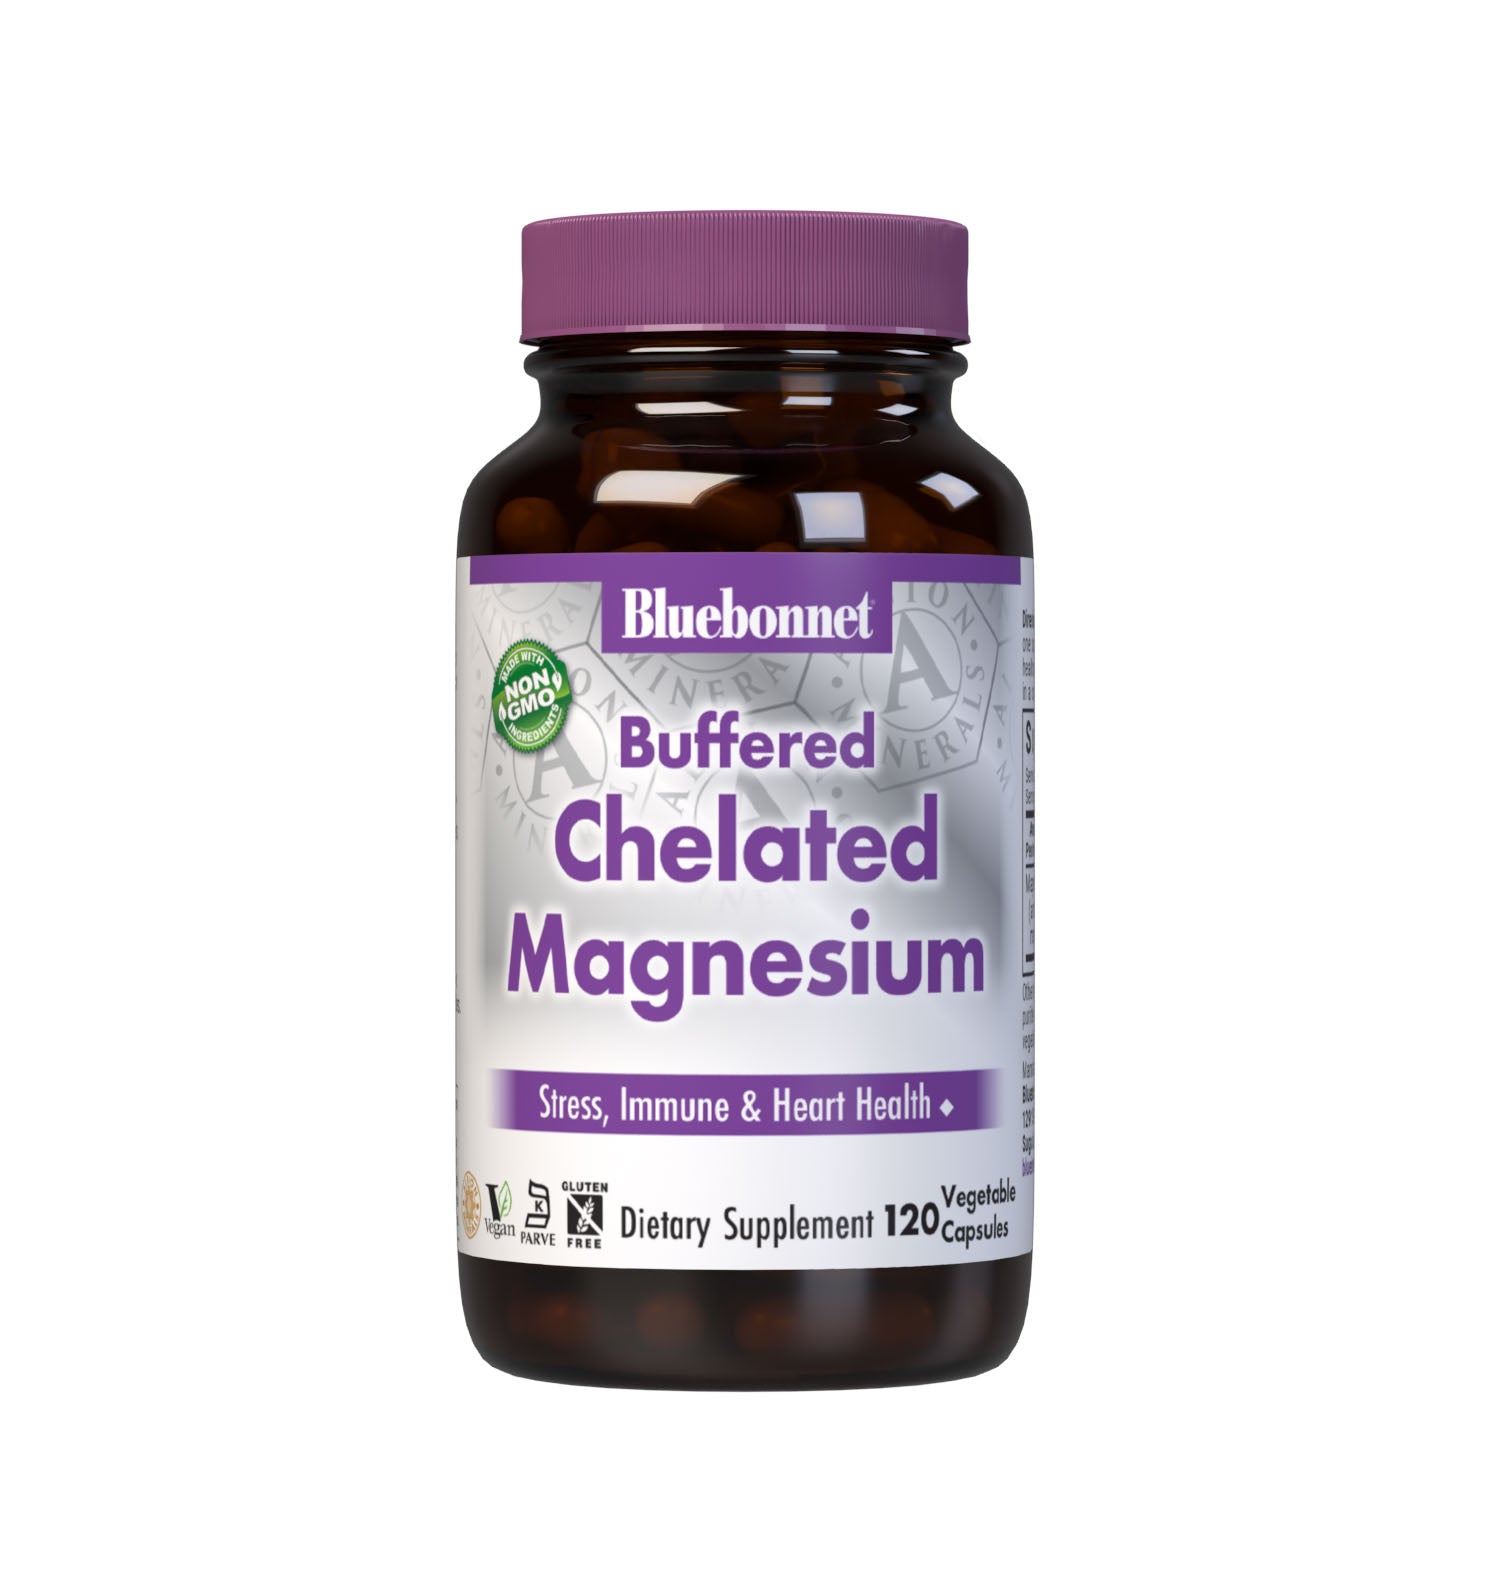 Bluebonnet's Buffered Chelated Magnesium 120 Vegetable Capsules are formulated with chelated magnesium bisglycinate buffered with magnesium oxide to increase the pH (alkalinity) to make it gentle on the digestive tract. #size_120 count